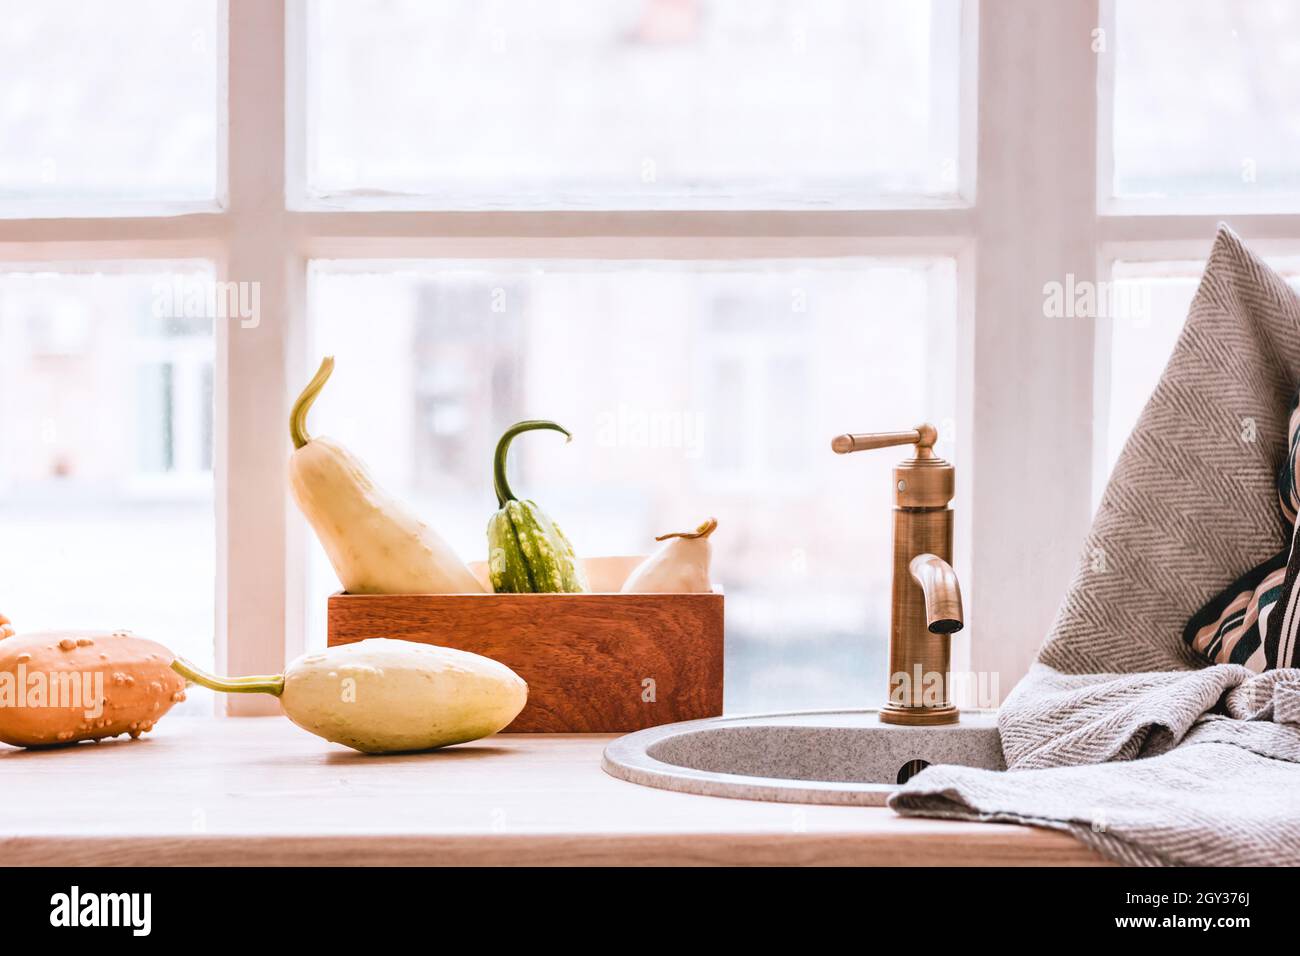 Hygge vintage copper kitchen tap and towel on a wooden table before window. Pumpkin season and autumnal interior design with cozy decoration elements Stock Photo